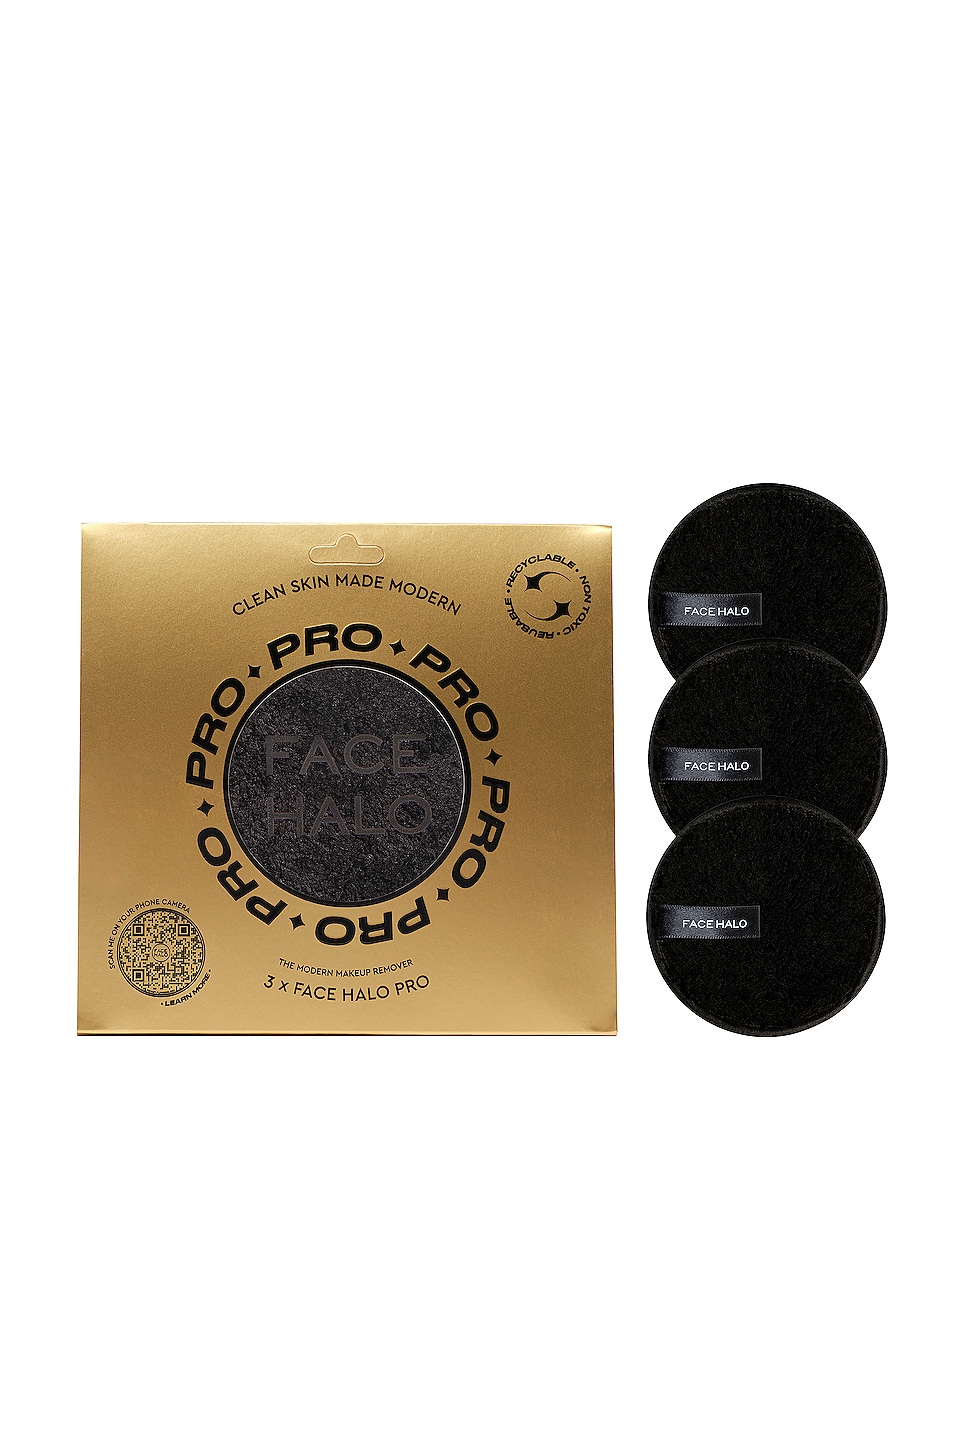 Face Halo Pro 3 Pack In Pro Black